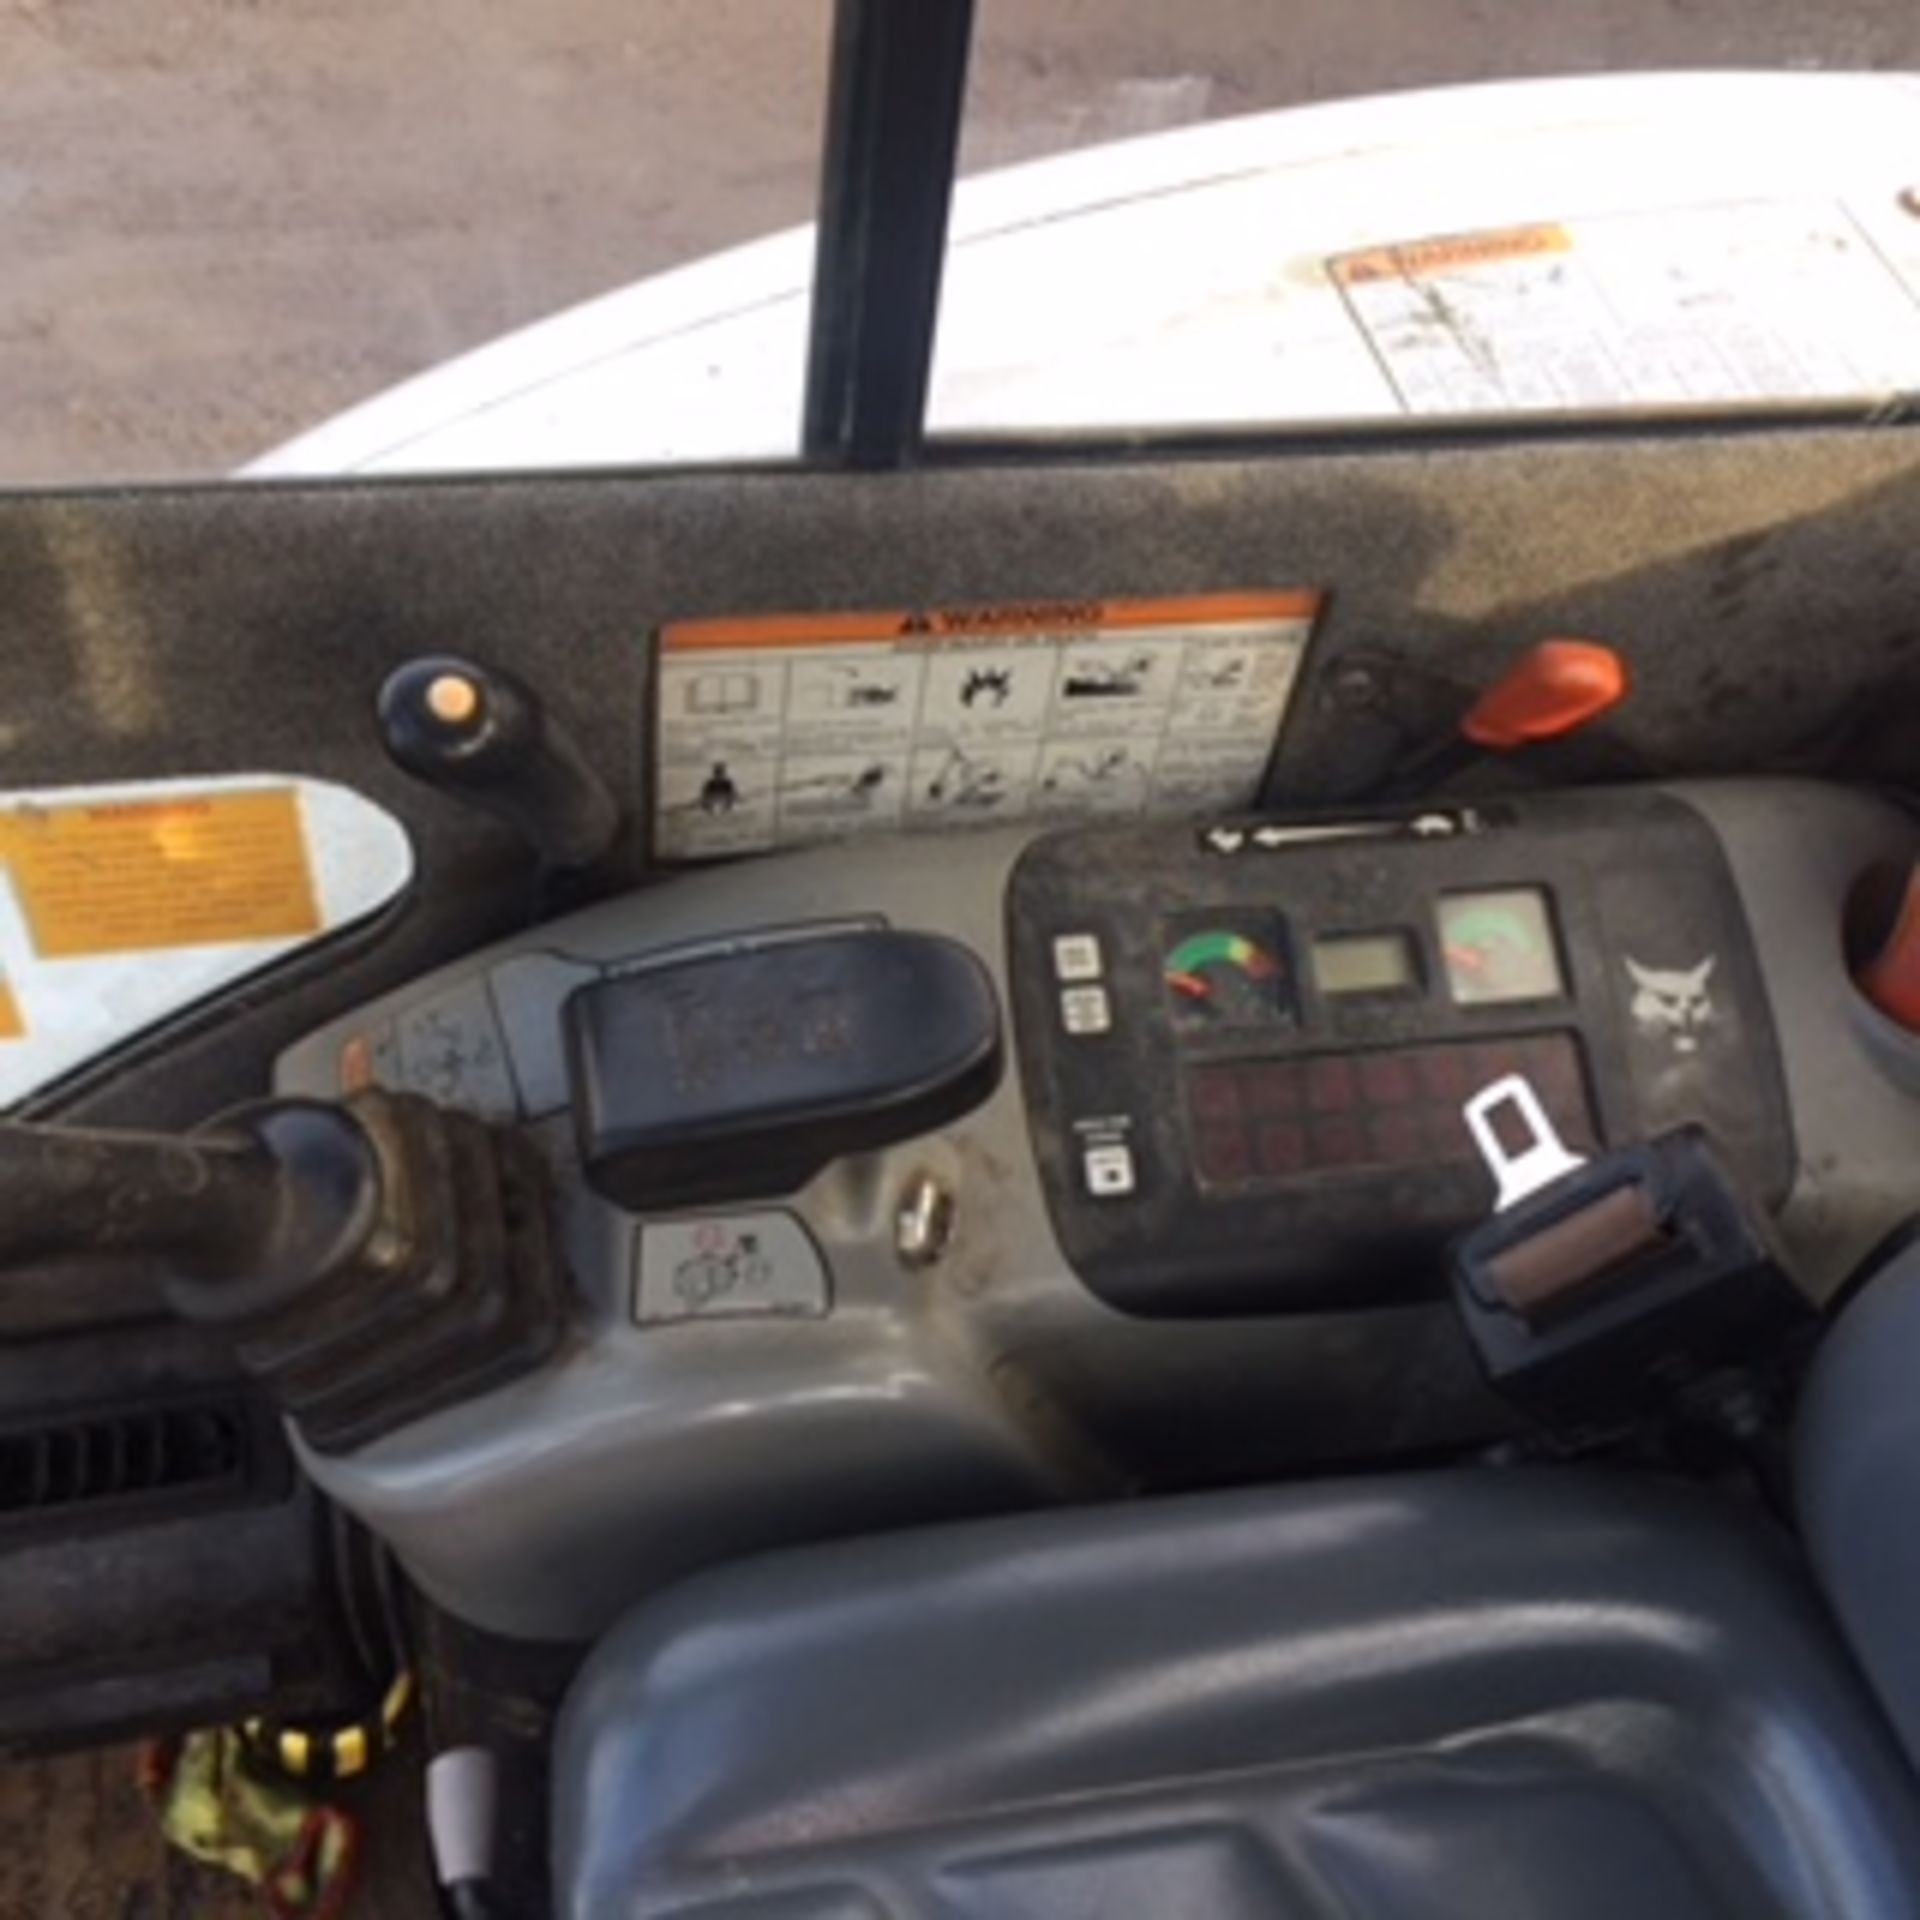 2006 BOBCAT 328G, S/N 234213742, 2760HRS (NOT VERIFIED) C/W 1 BUCKET** VIEWED FROM & SOLD AT G69 6DW - Image 2 of 10